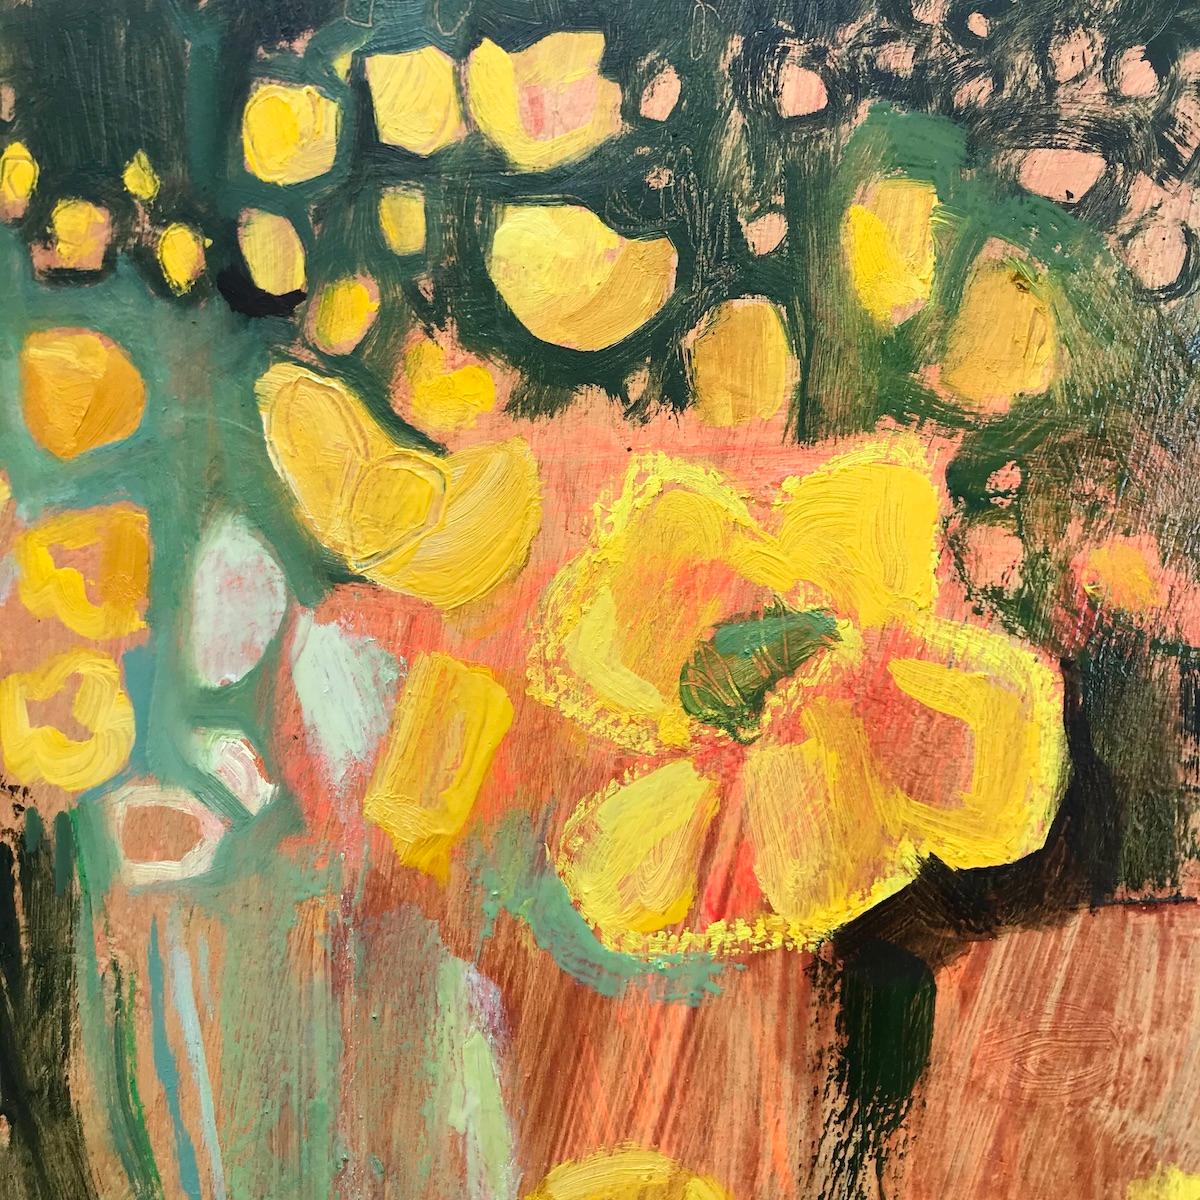 Golden Buttercups with Gold Leaf By Elaine Kazimierczuk [2019]
original
oil on canvas
Image size: H:97 cm x W:97 cm
Complete Size of Unframed Work: H:97 cm x W:97 cm x D:3.5cm
Frame Size: H:102 cm x W:102 cm x D:4cm
Sold Framed
Please note that